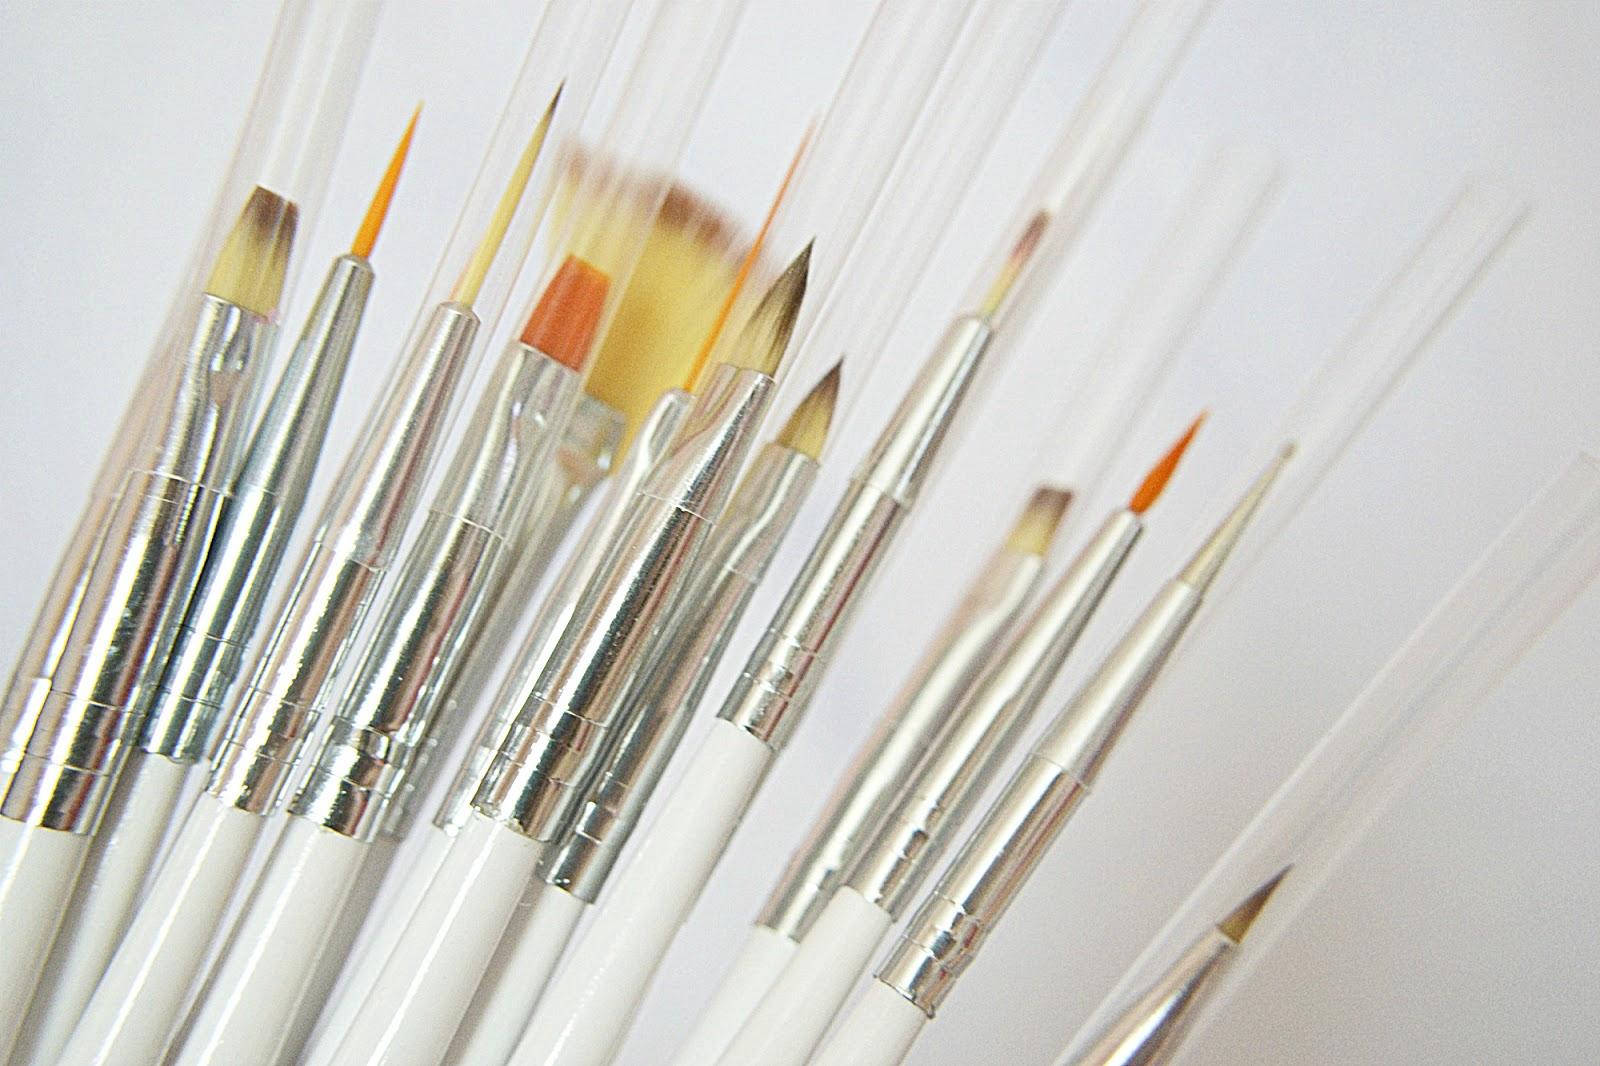 How to choose an acrylic paint brush?